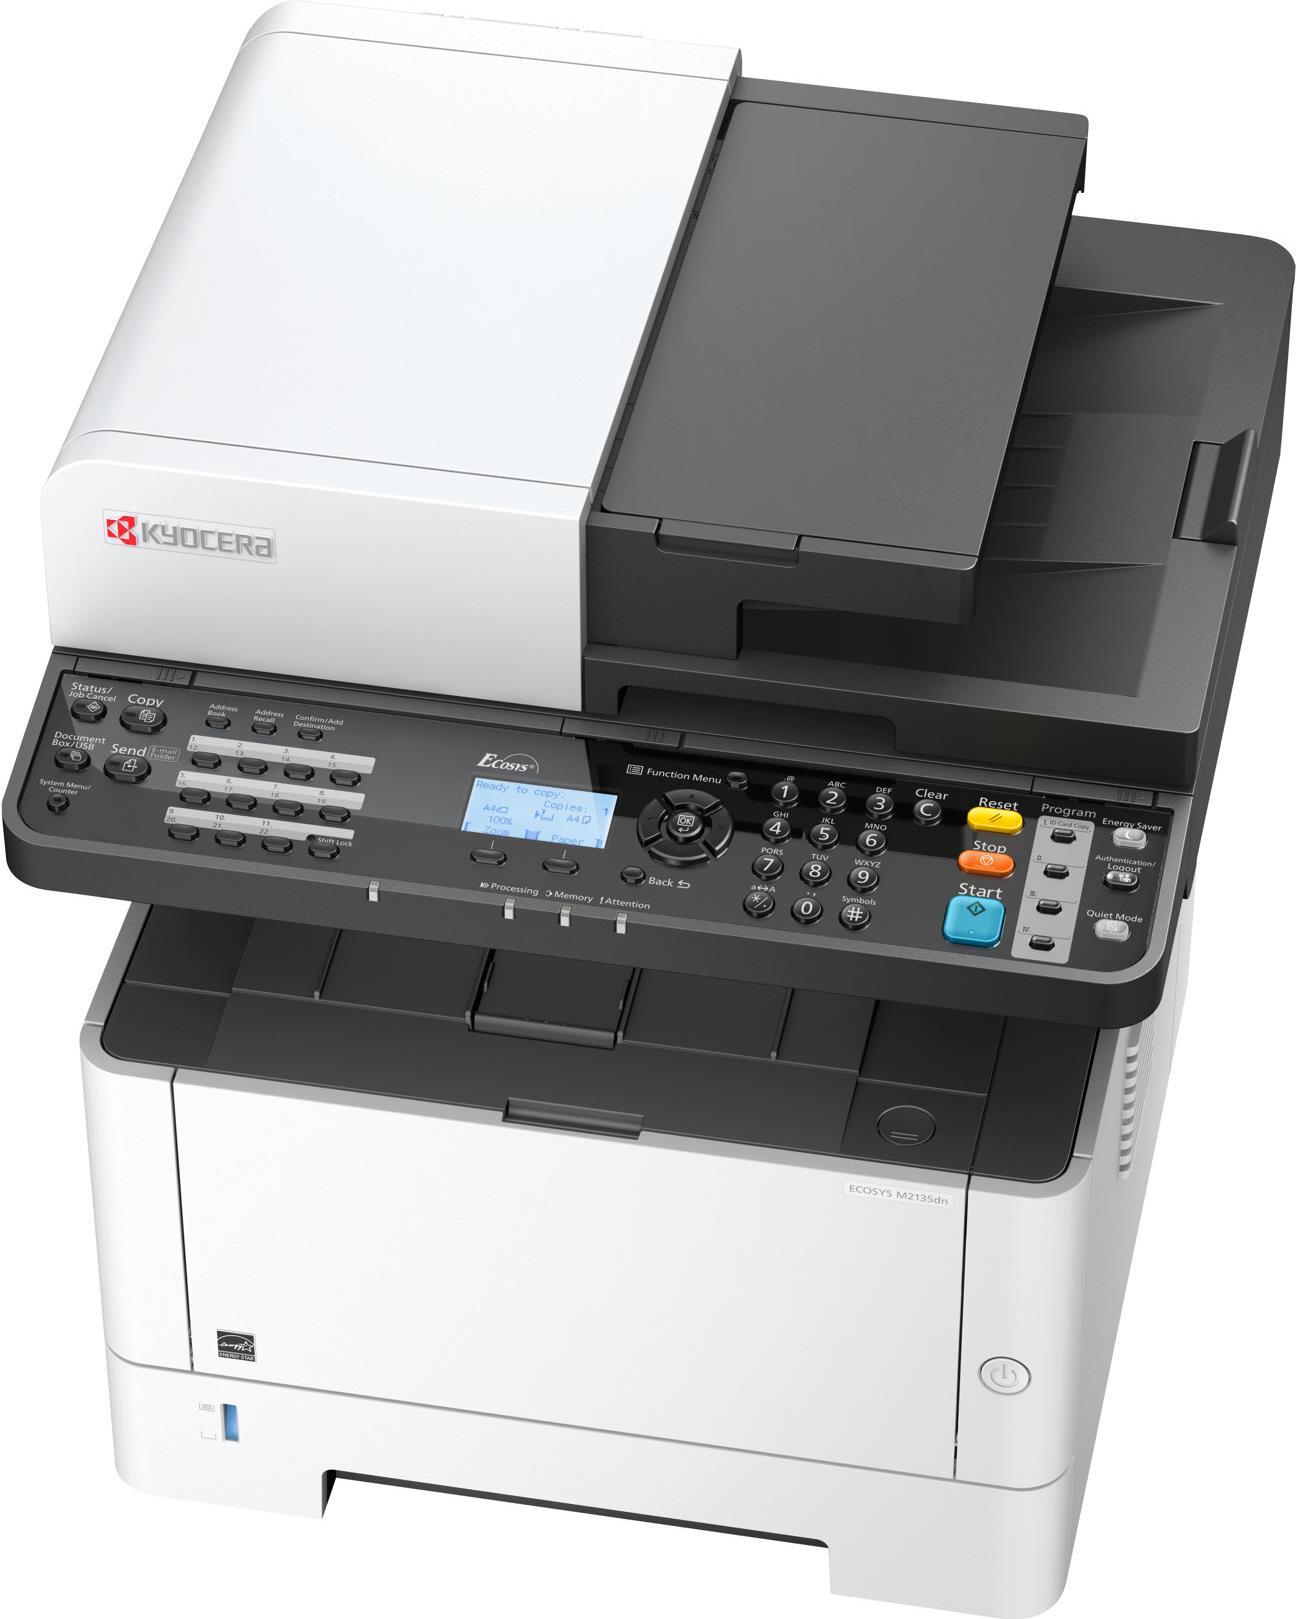 KYOCERA ECOSYS M2135dn/Plus Mono Laser Printer A4 35ppm Print Scan Copy Climate Protection System (870B61102S03NL3)